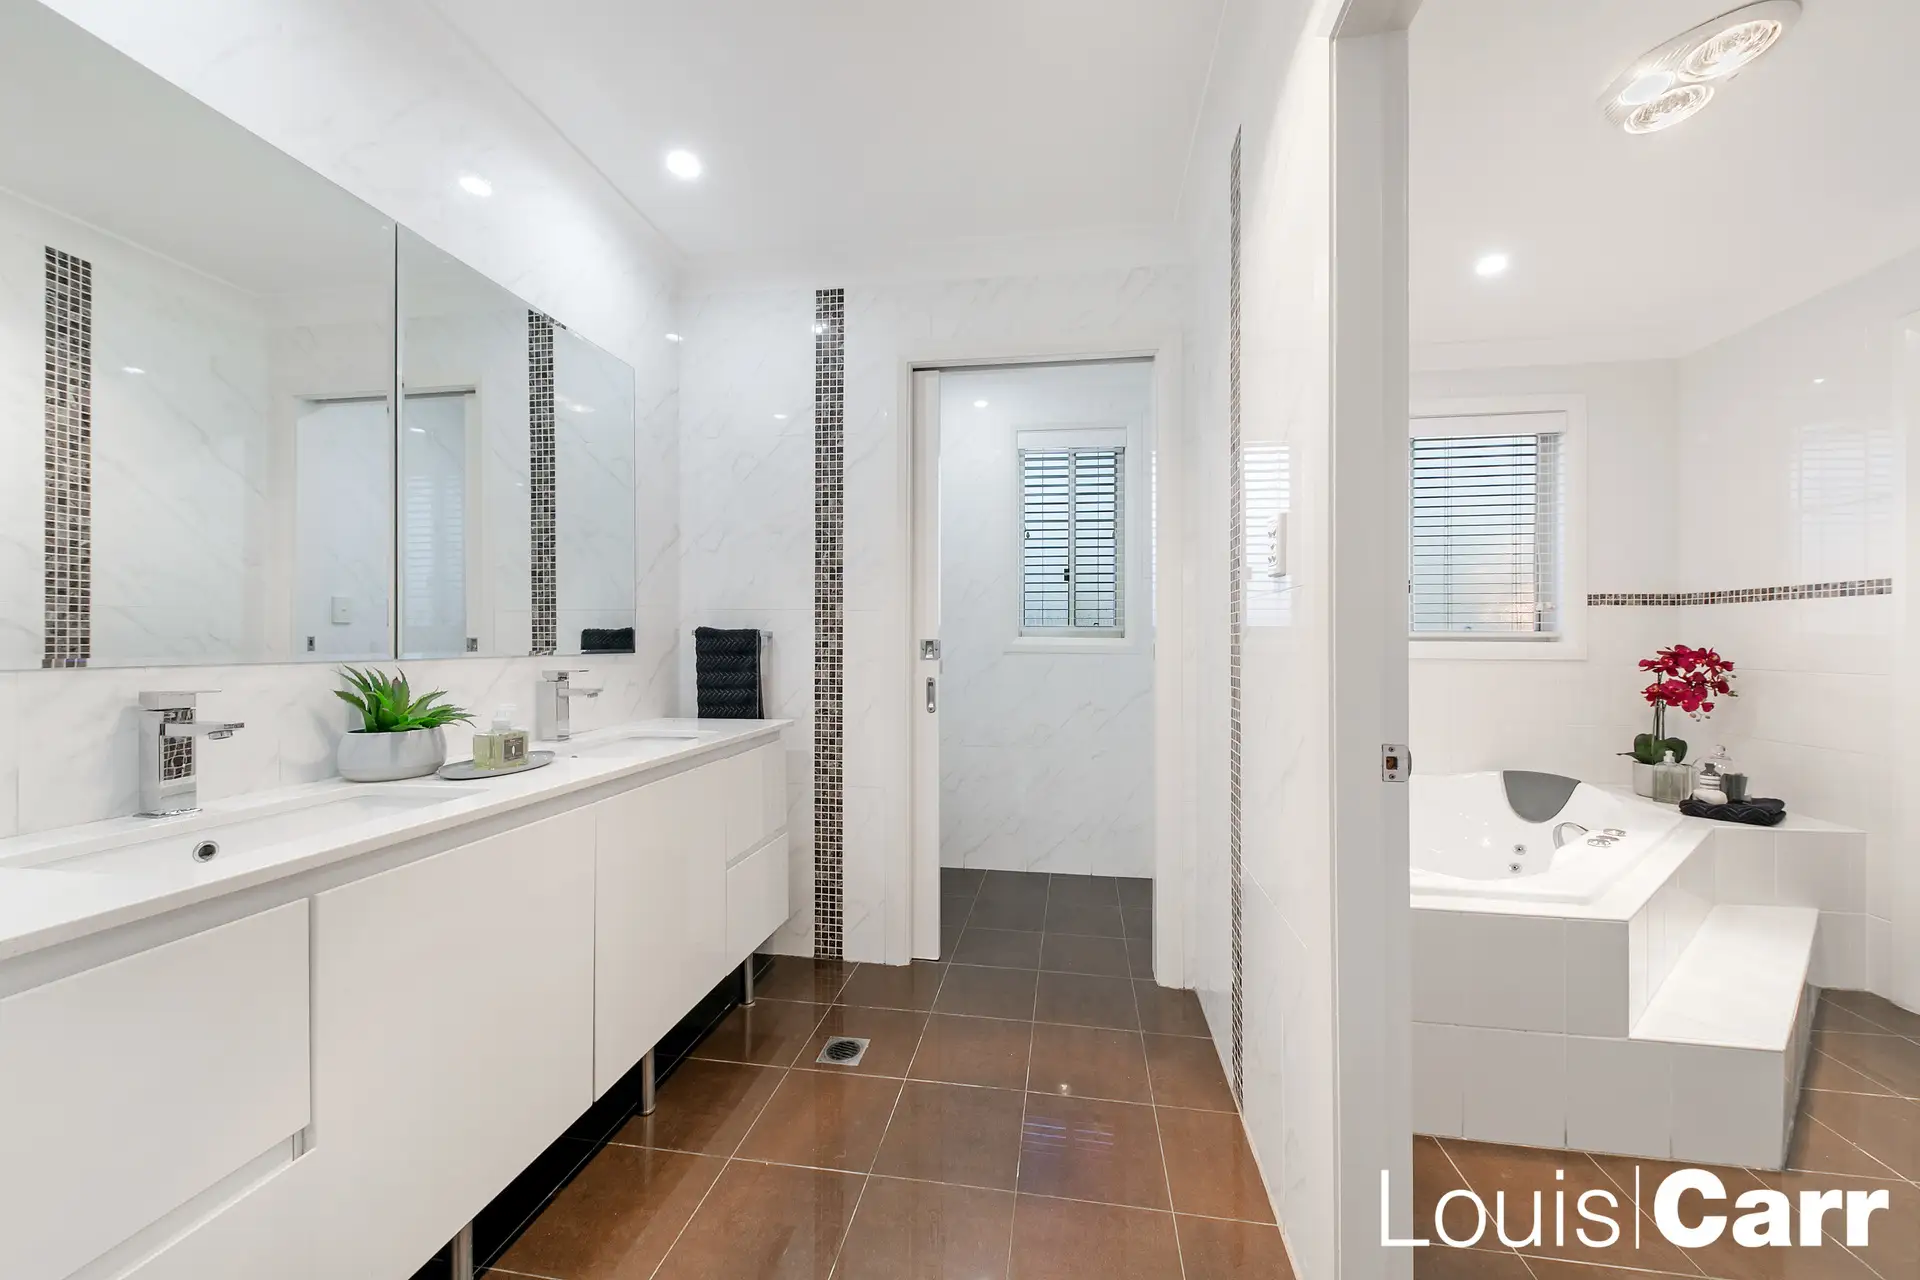 Photo #13: 94 Tamboura Avenue, Baulkham Hills - Sold by Louis Carr Real Estate